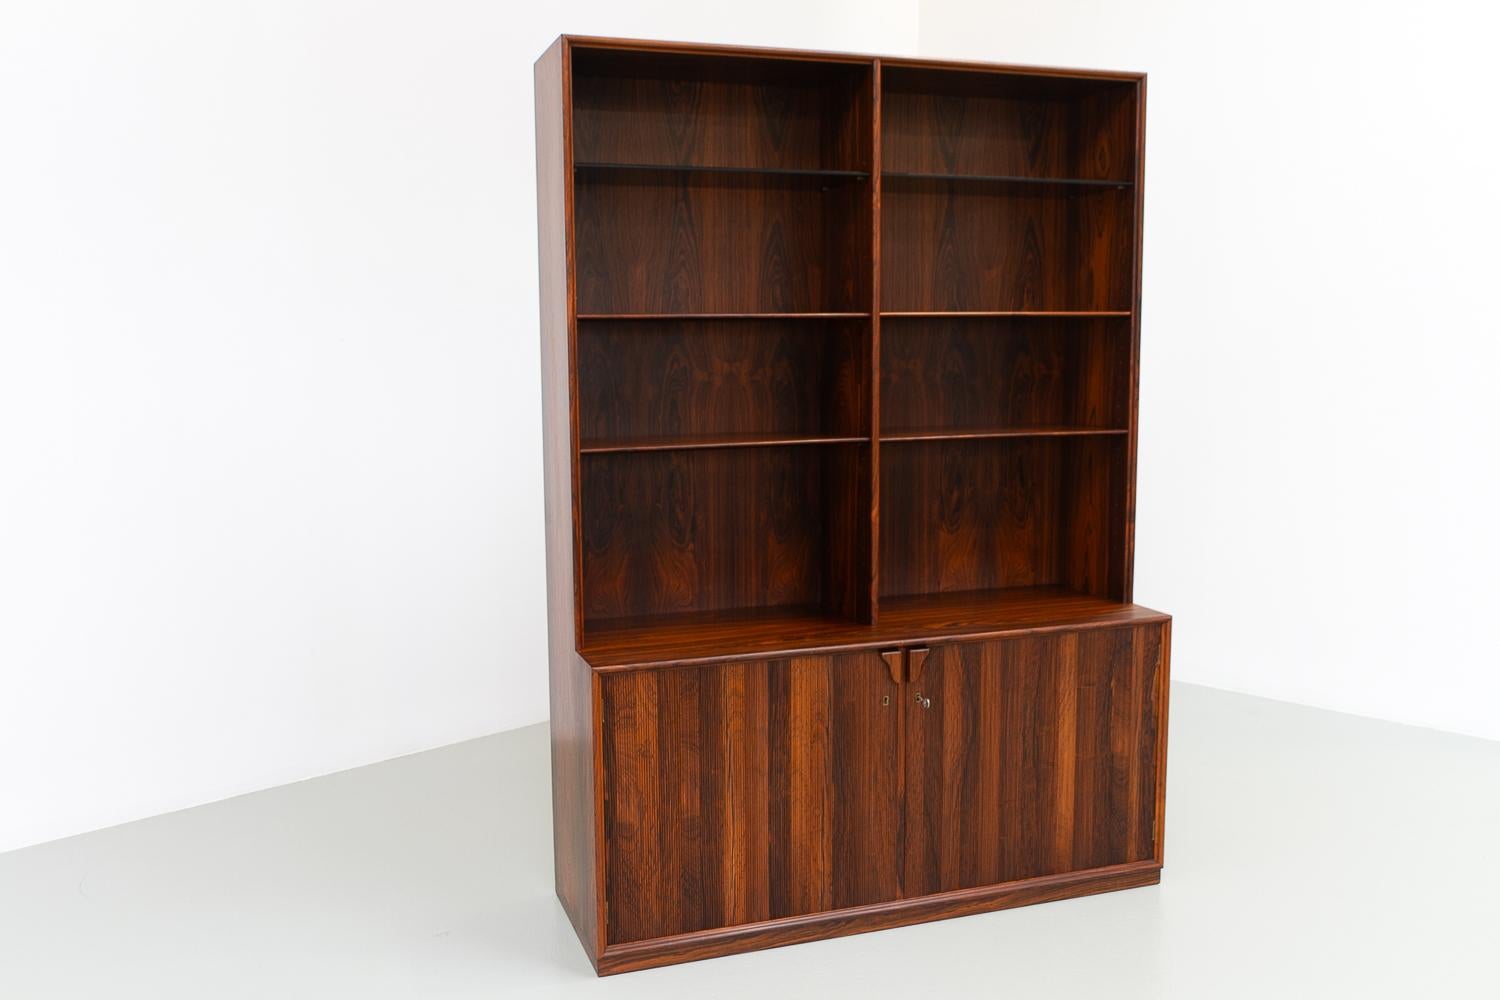 Danish Modern Rosewood Bookcase by Frode Holm for Illums, 1950s. In Good Condition For Sale In Asaa, DK